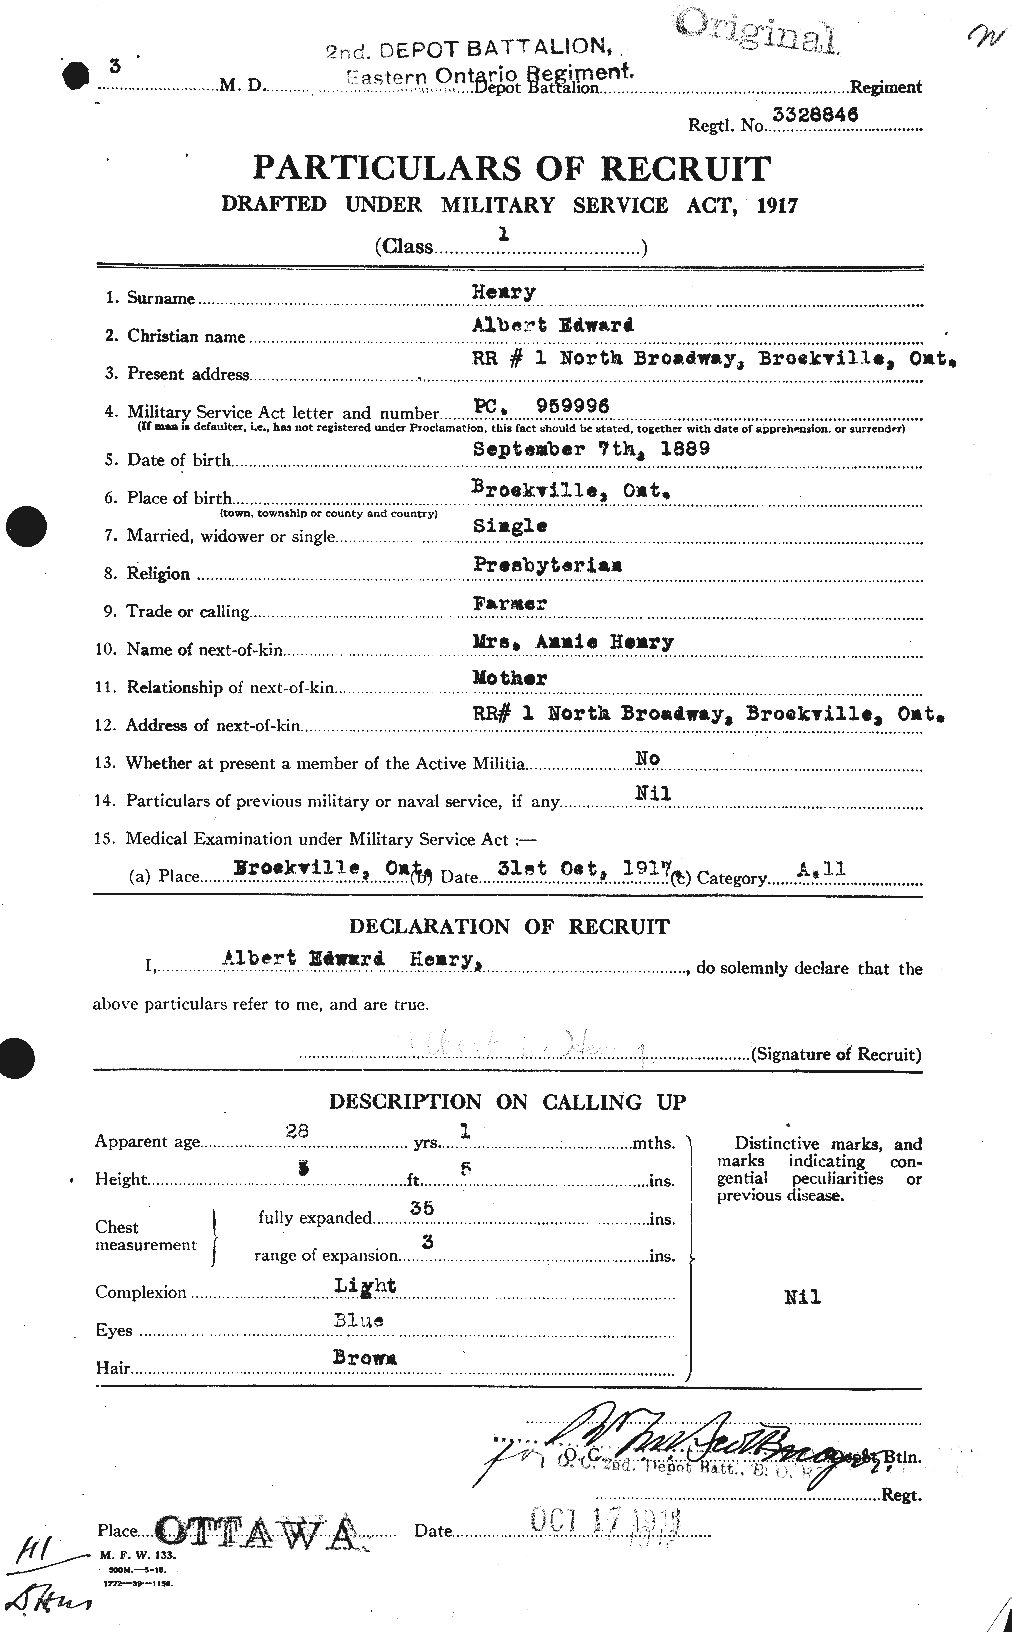 Personnel Records of the First World War - CEF 391649a